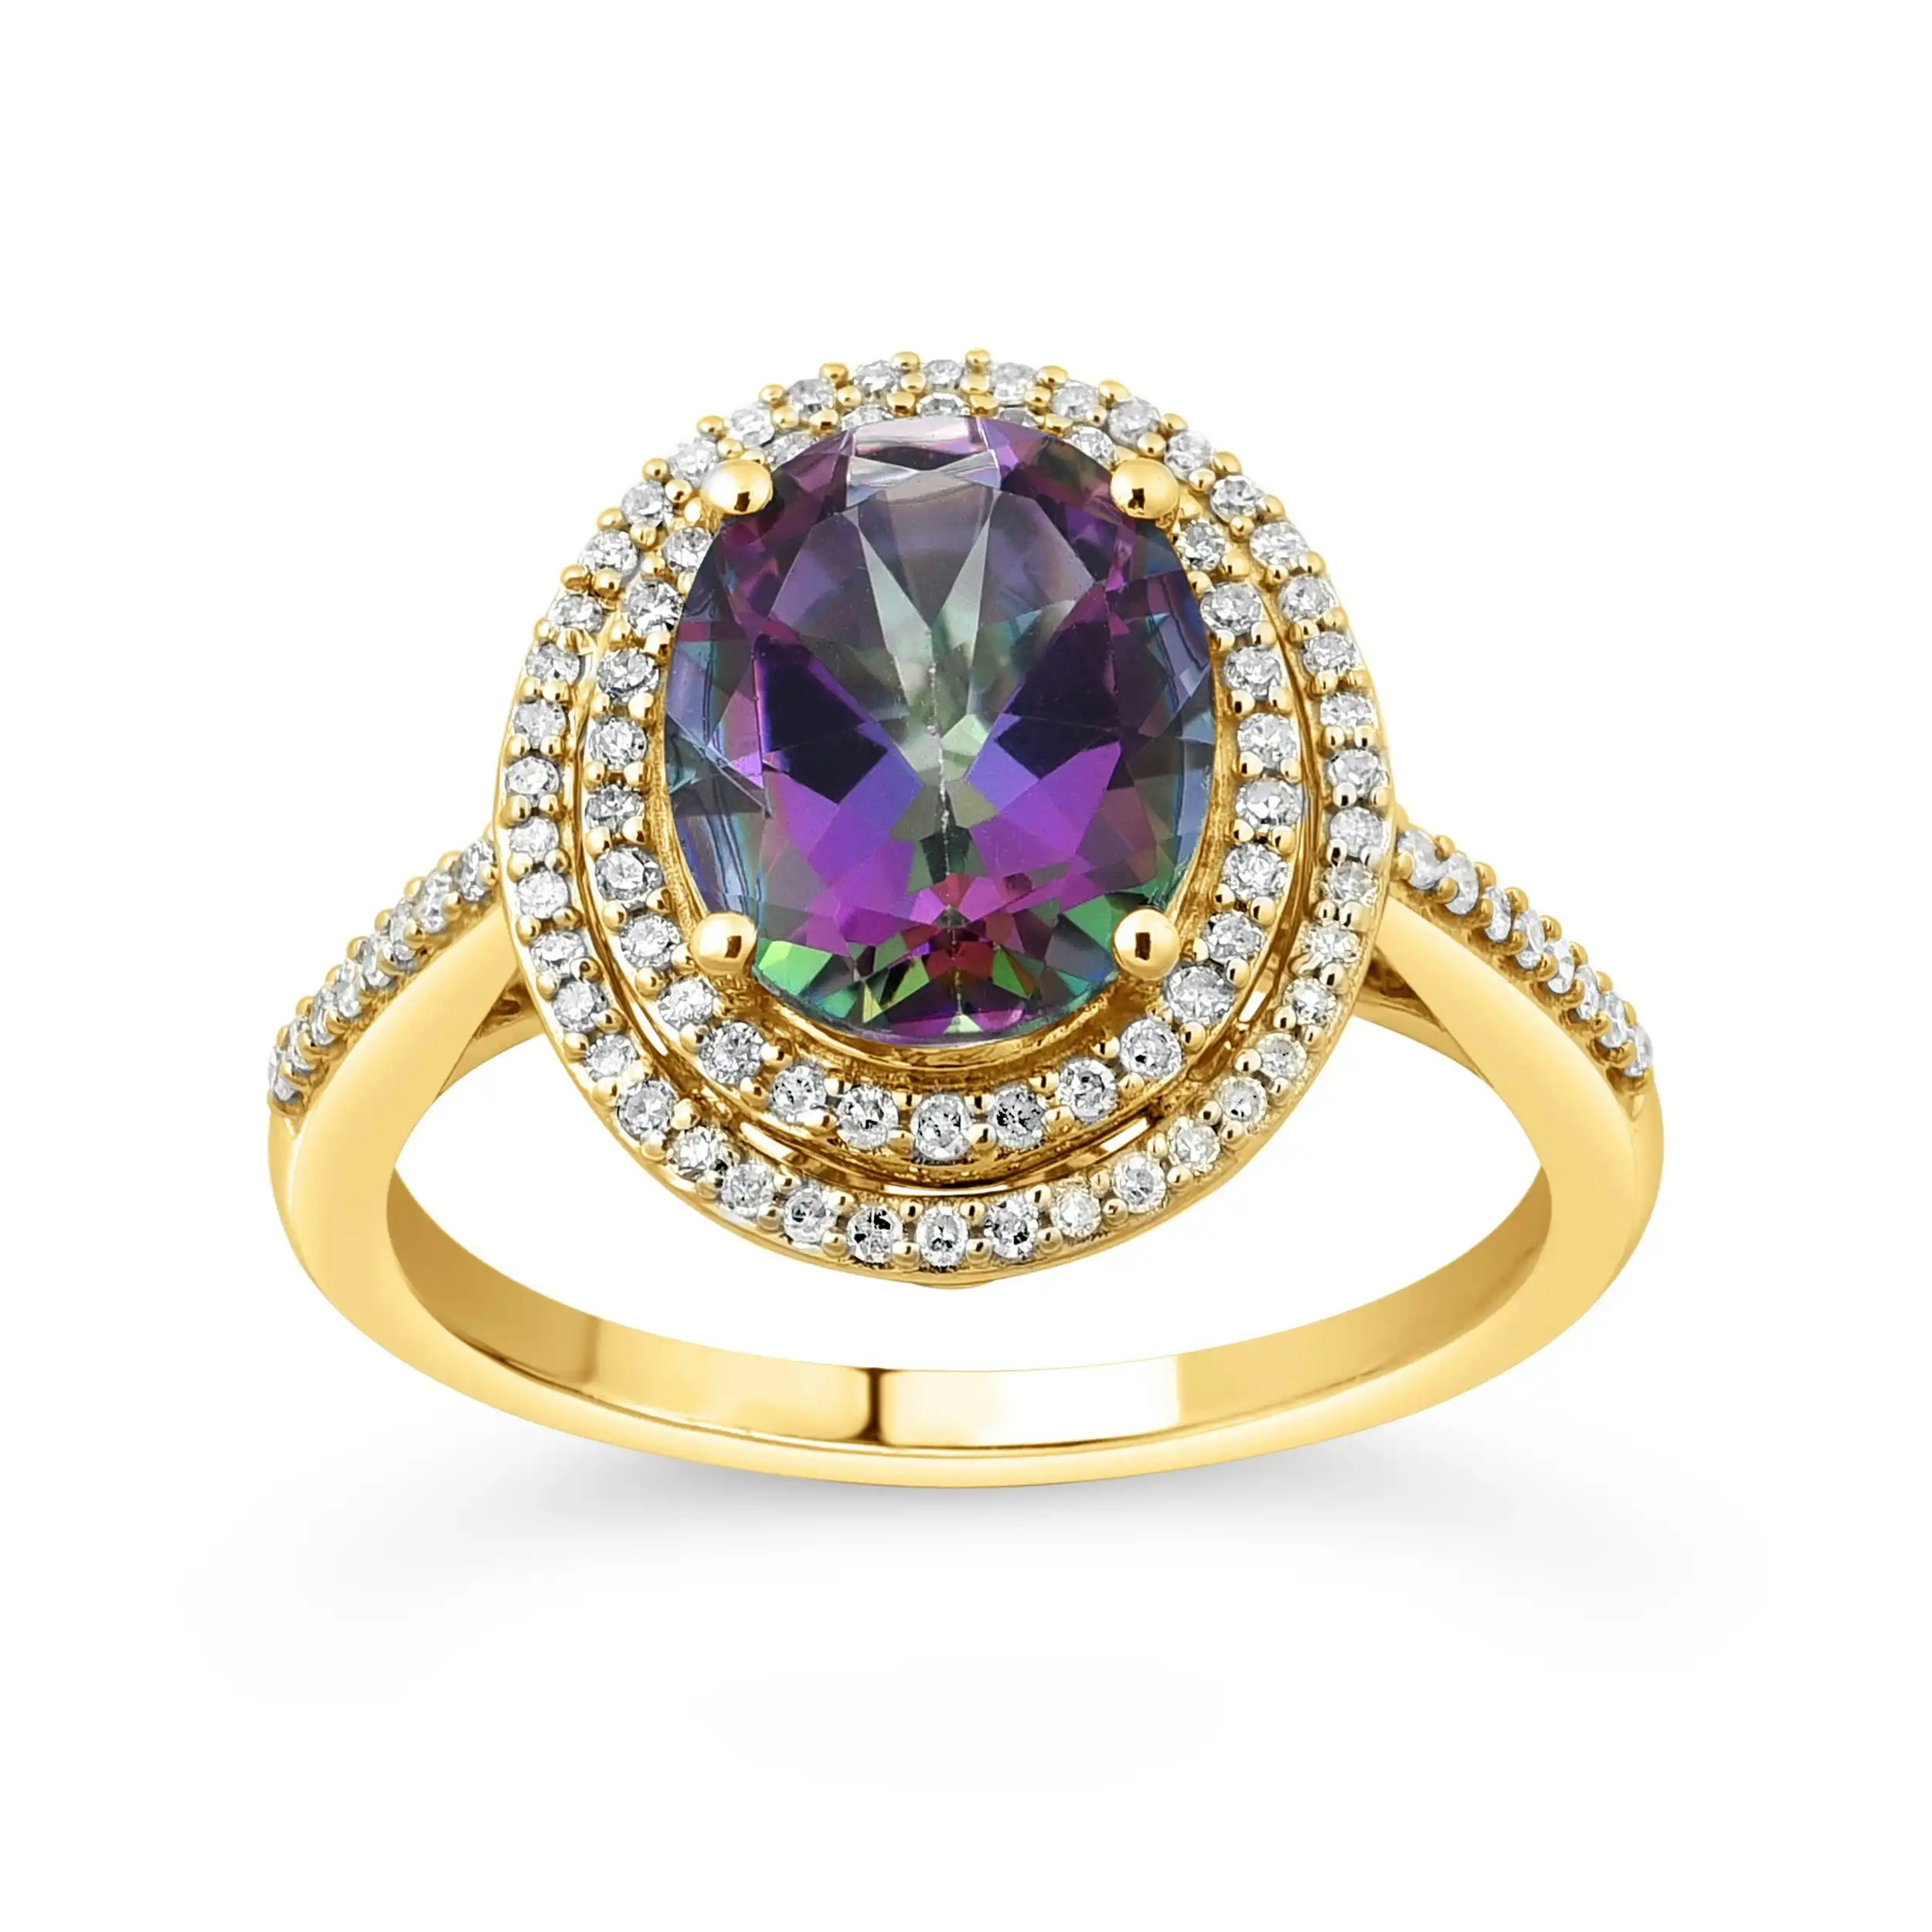 Mystic Topaz Ring with 1/4ct of Diamonds in 9ct Yellow Gold